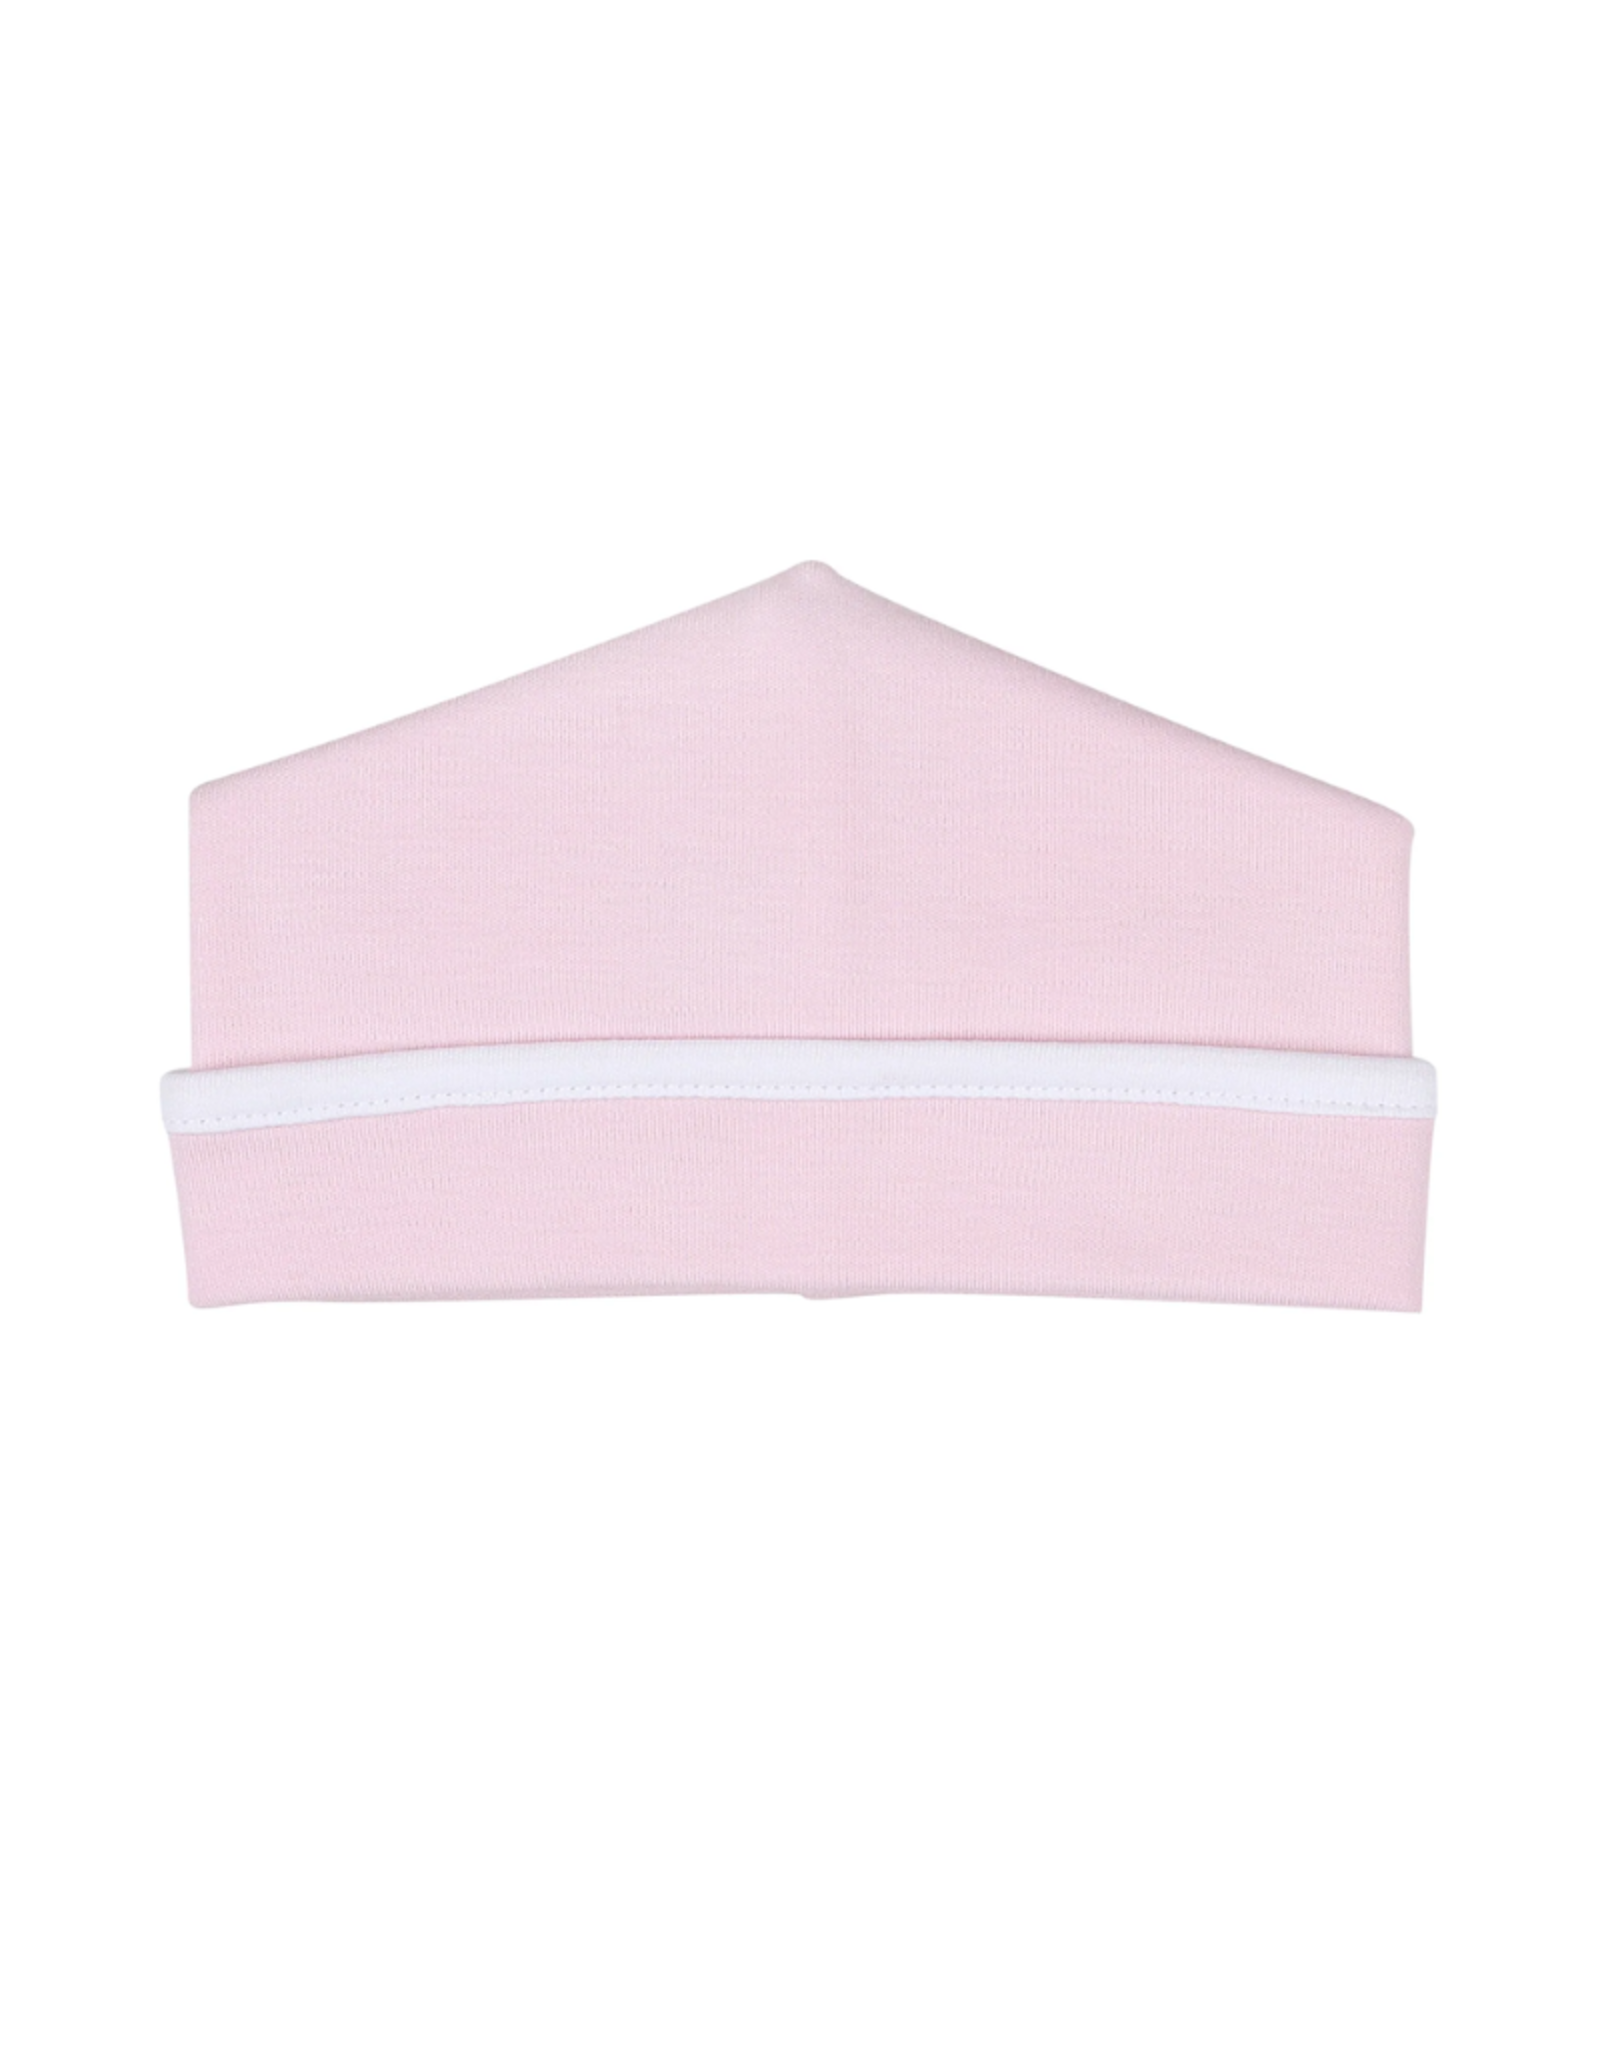 Magnolia Baby Simply Solids Hat, Pink